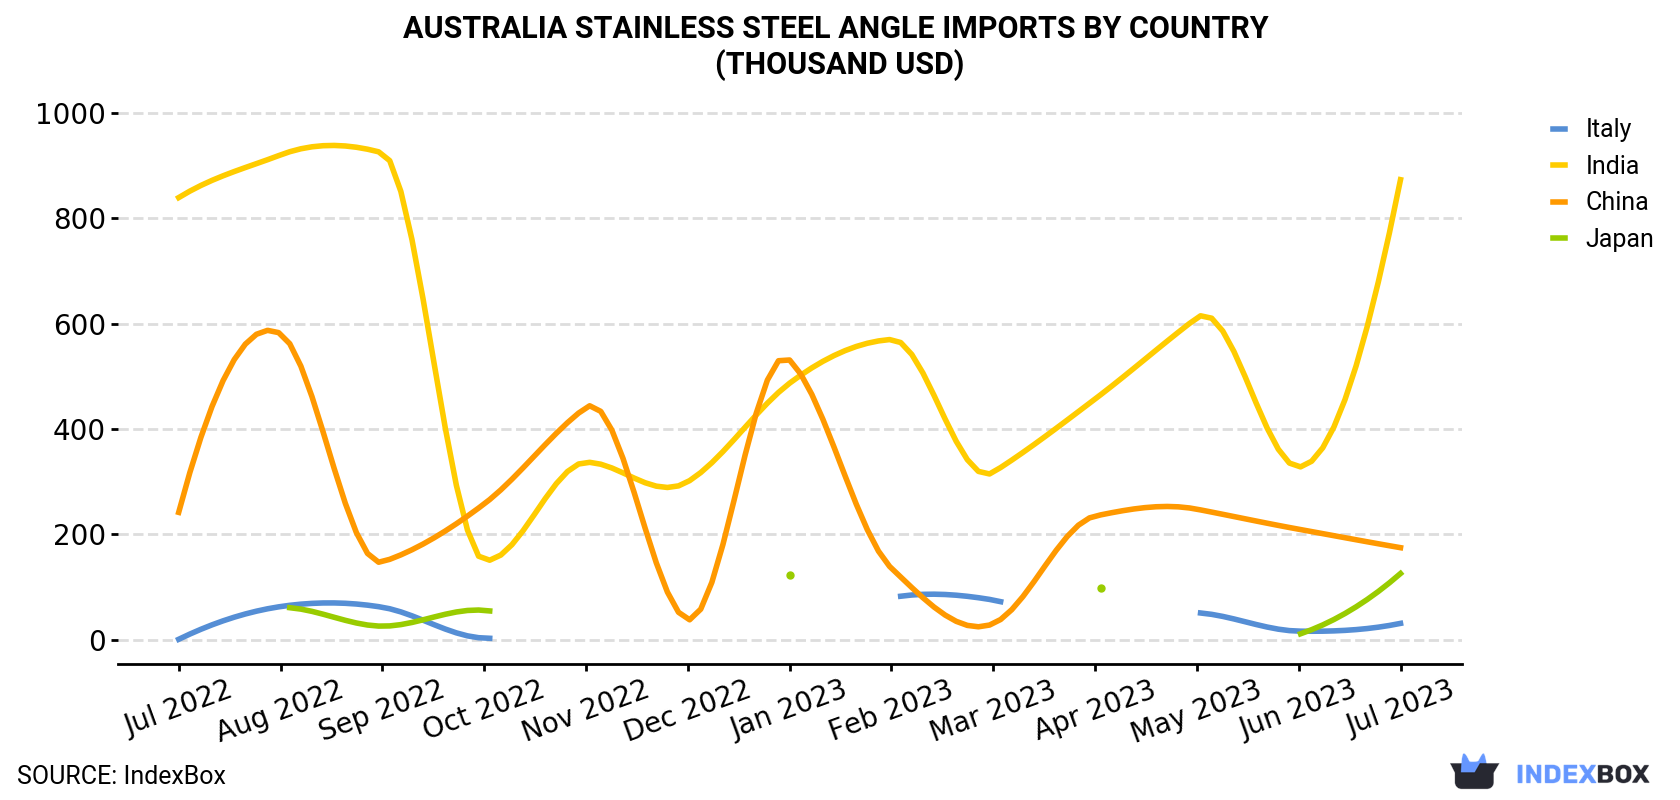 Australia Stainless Steel Angle Imports By Country (Thousand USD)